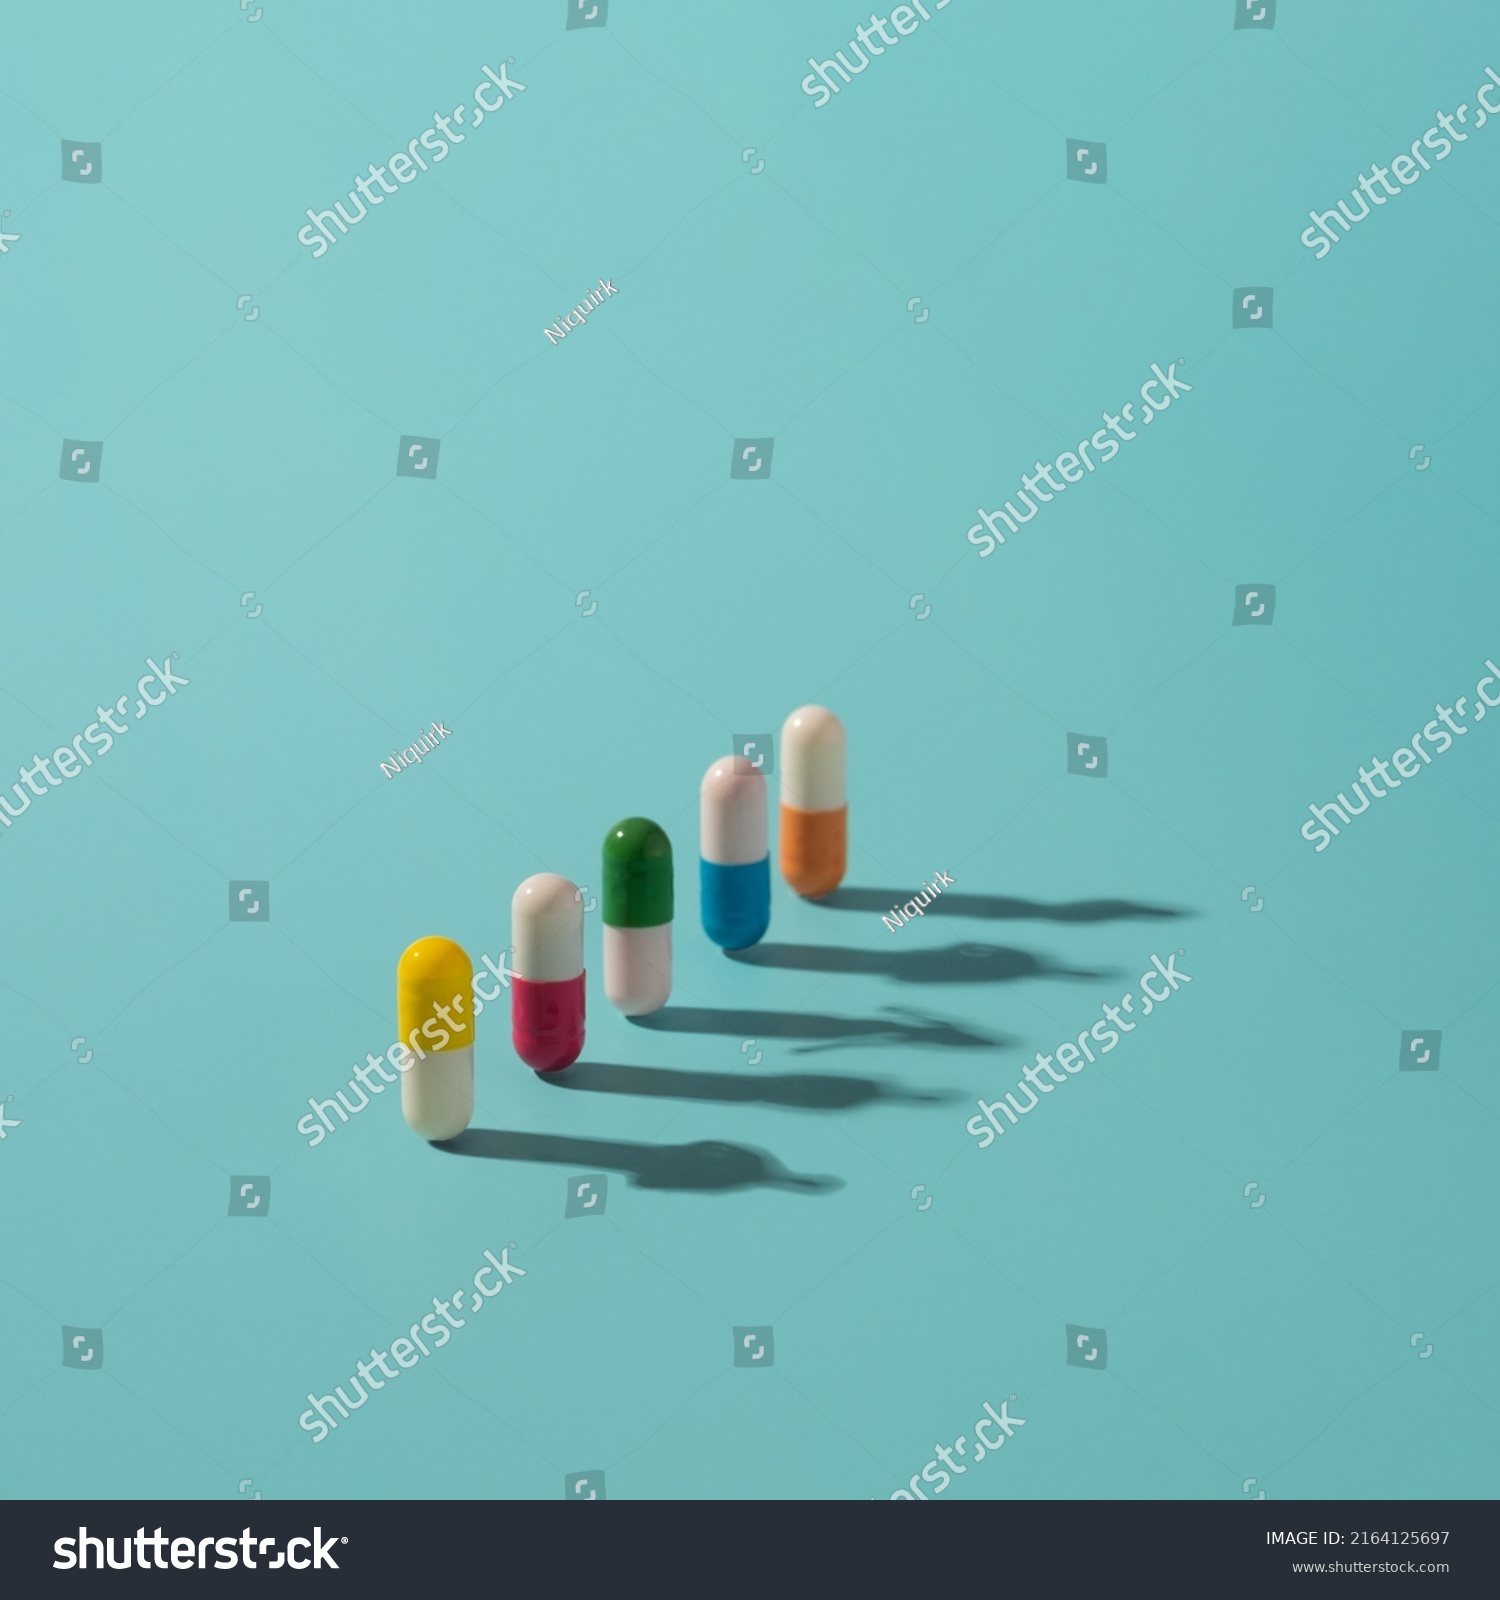 Medicine pills with colorful elements and human shadows on the surface. Health, drugs addiction conceptual background. #2164125697